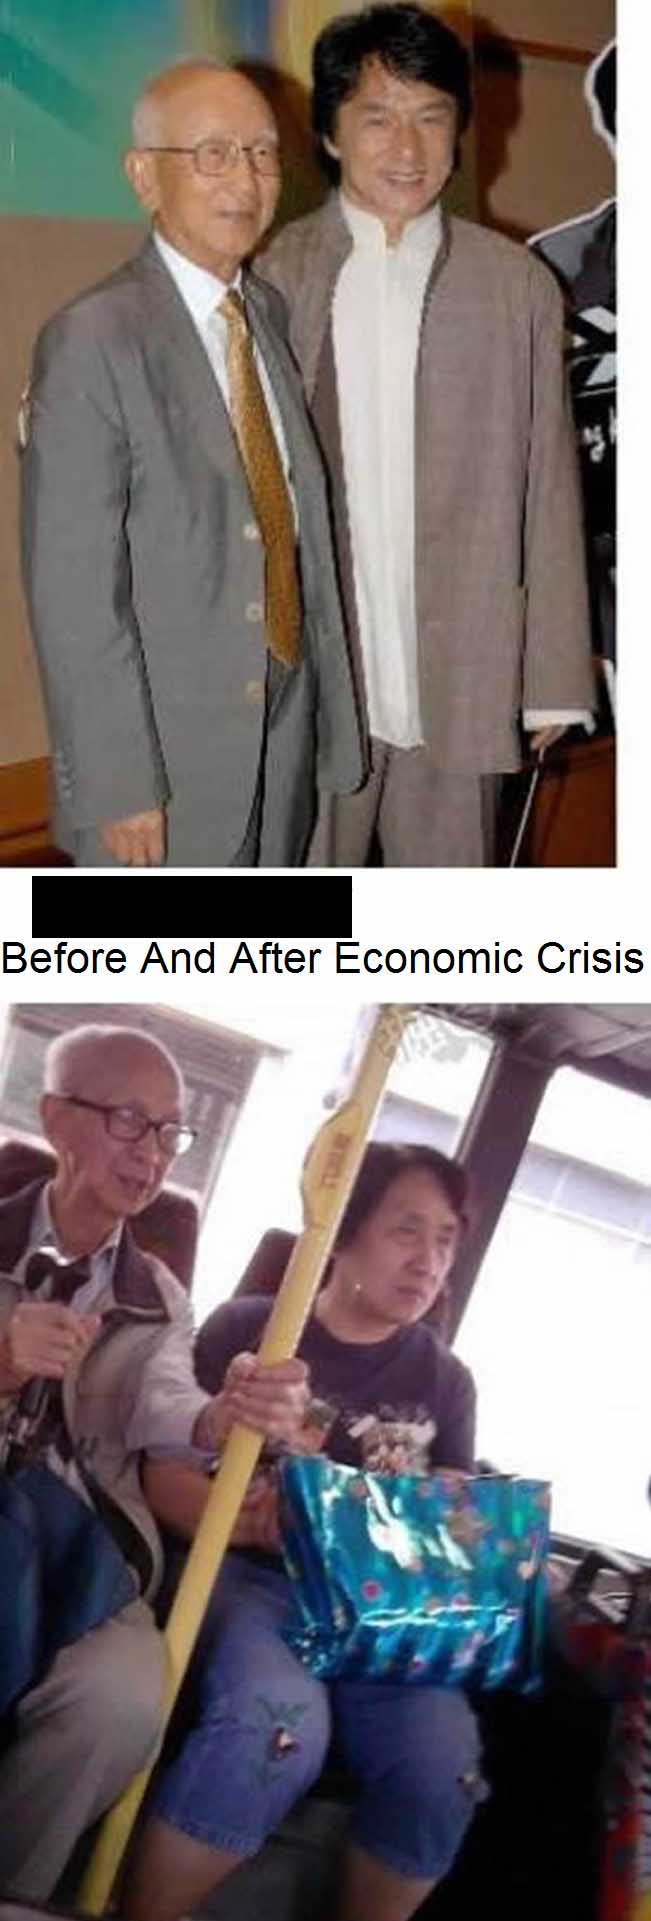 Before And After Economic Crisis - meme